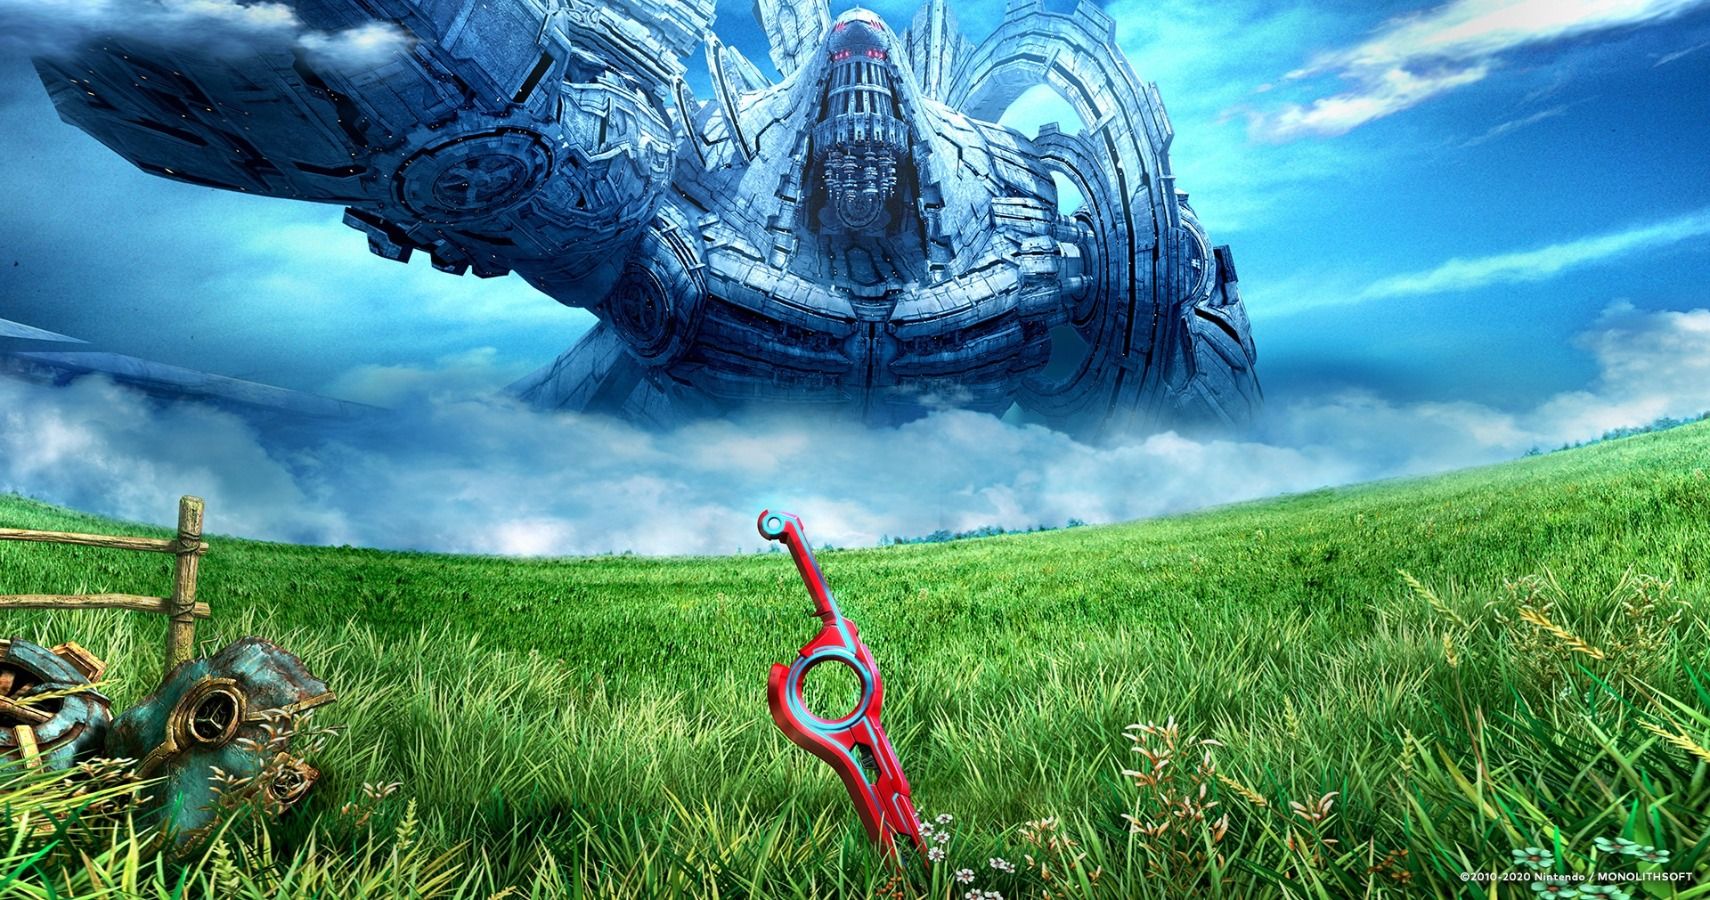 Xenoblade Chronicles Definitive Edition Review